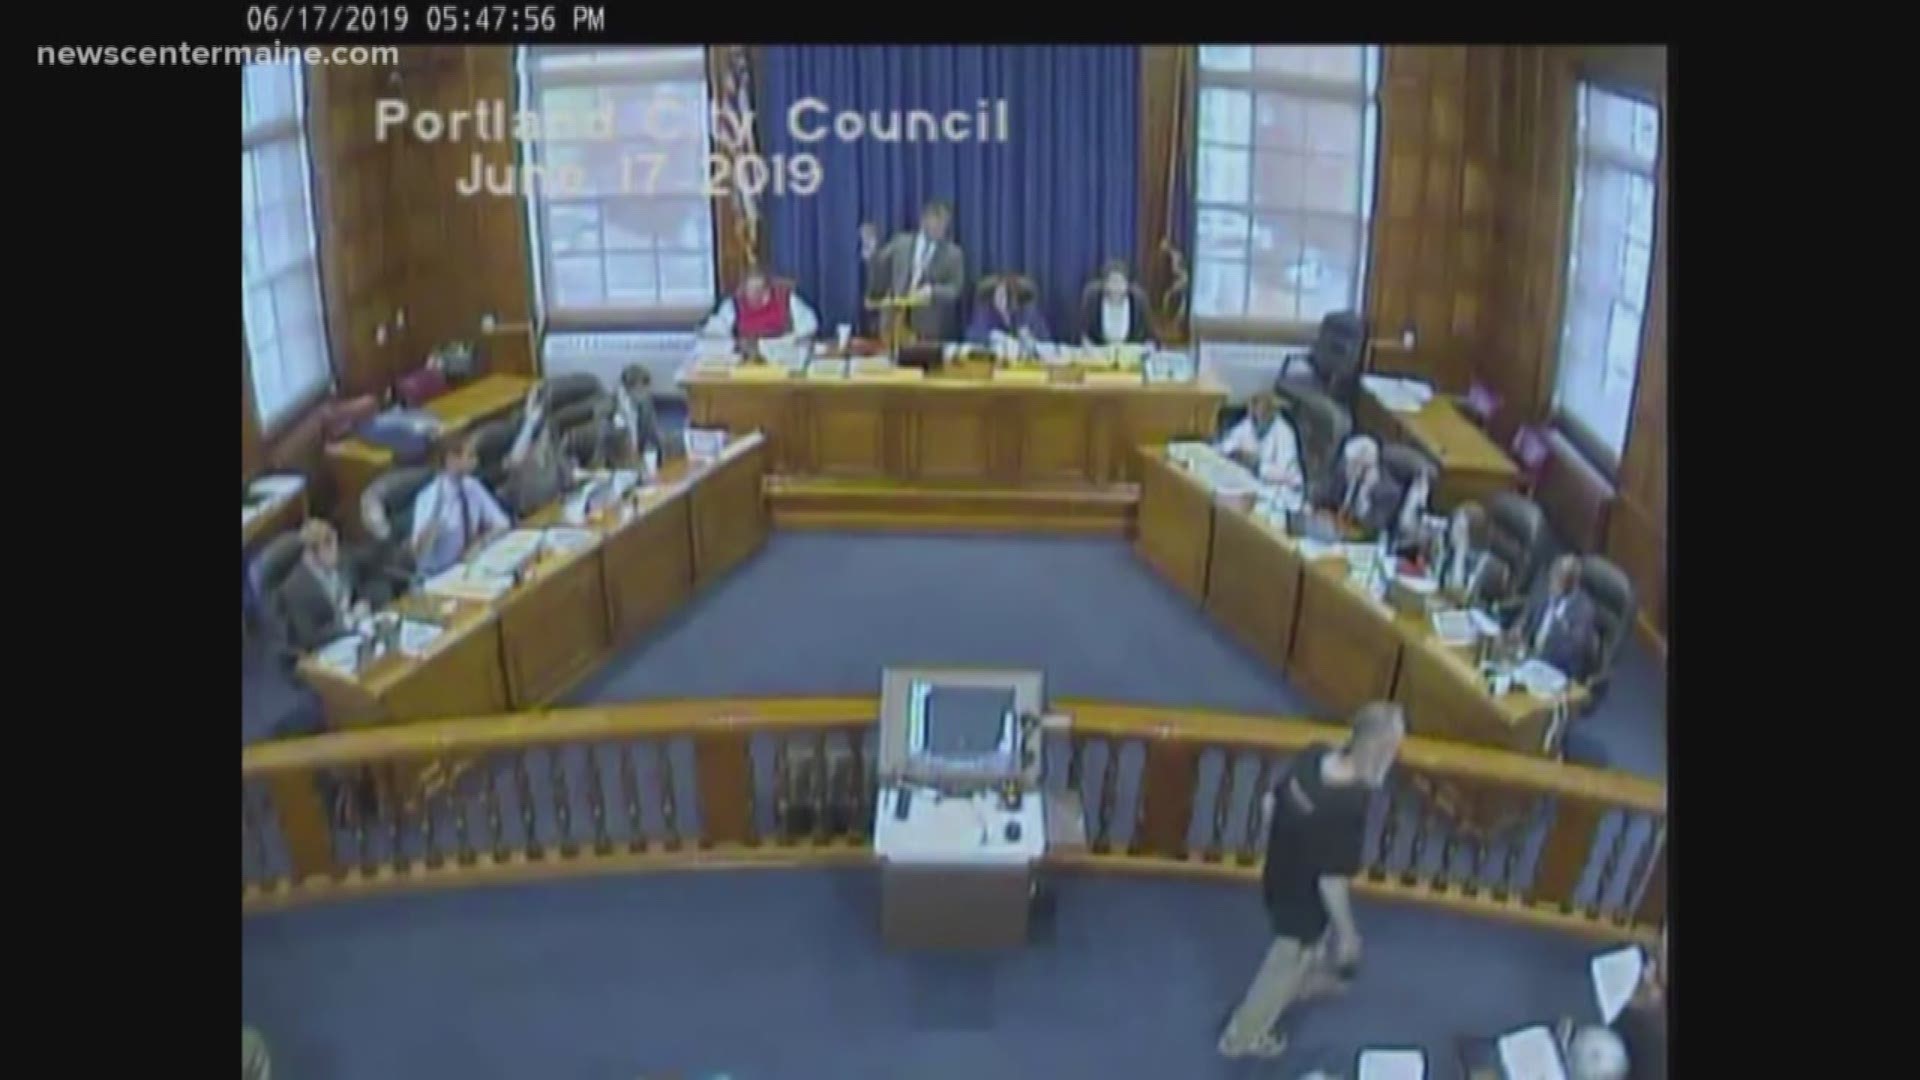 The Portland city council voted 5-4 to build a homeless shelter on Riverside Street. Those who opposed this decision say it's too far from downtown Portland. Those in favor say it has the necessary space.